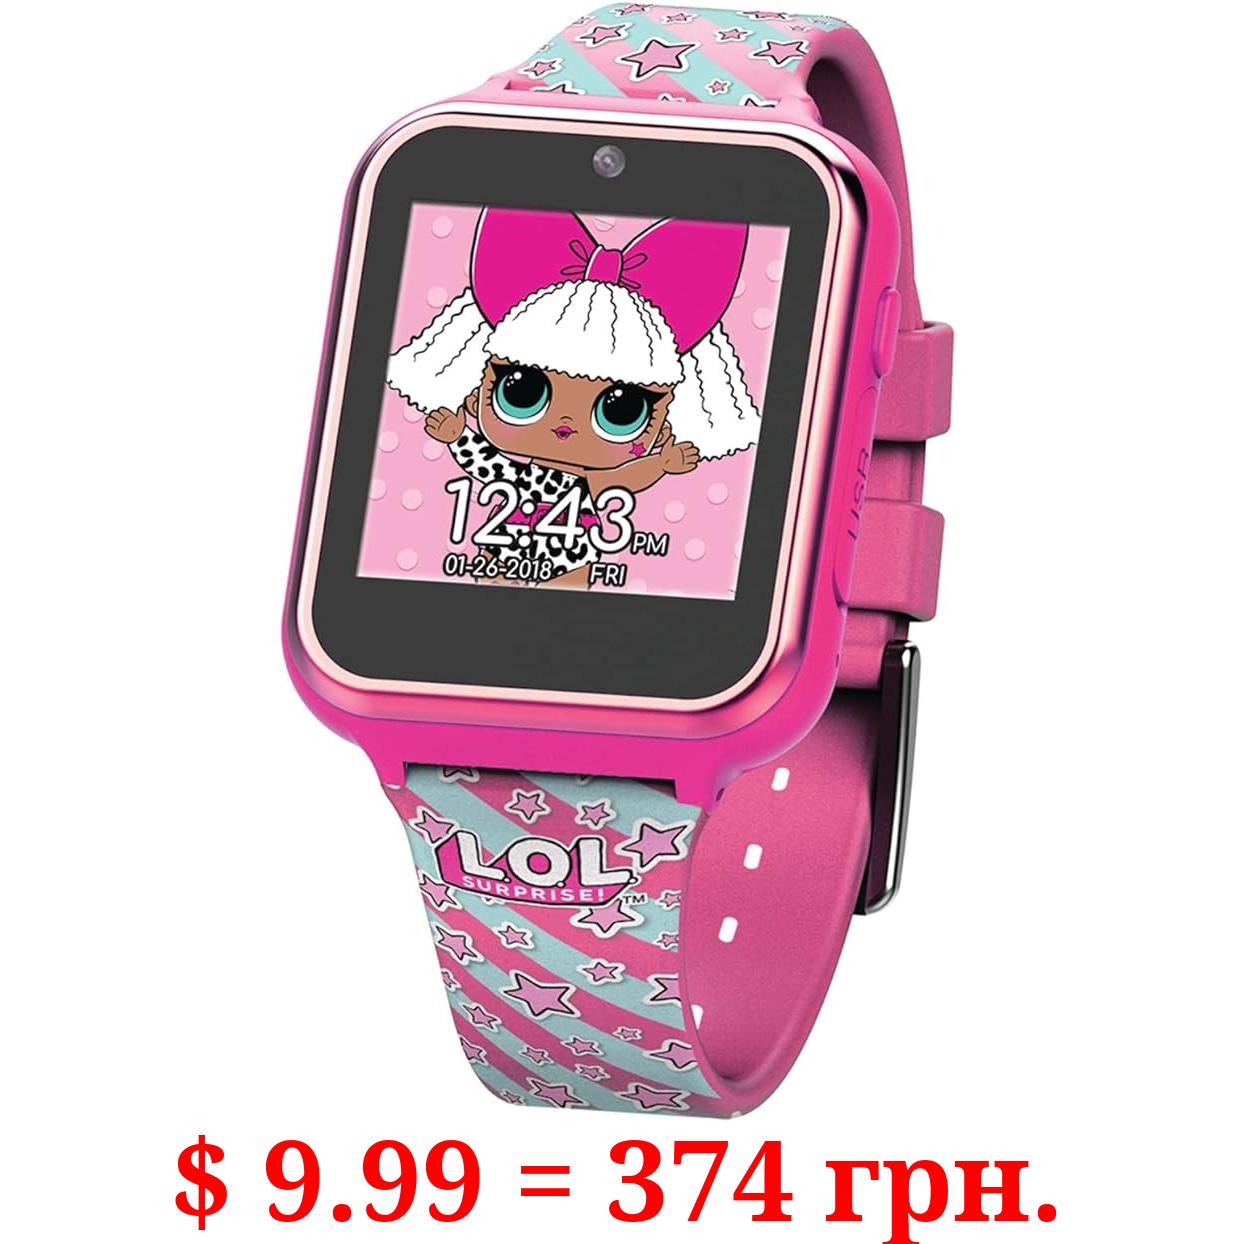 L.O.L. Surprise! Accutime Kids Hot Pink Educational Touchscreen Smart Watch Toy for Girls, Boys, Toddlers - Selfie Cam, Learning Games, Alarm, Calculator, Pedometer and more (Model: LOL4104)